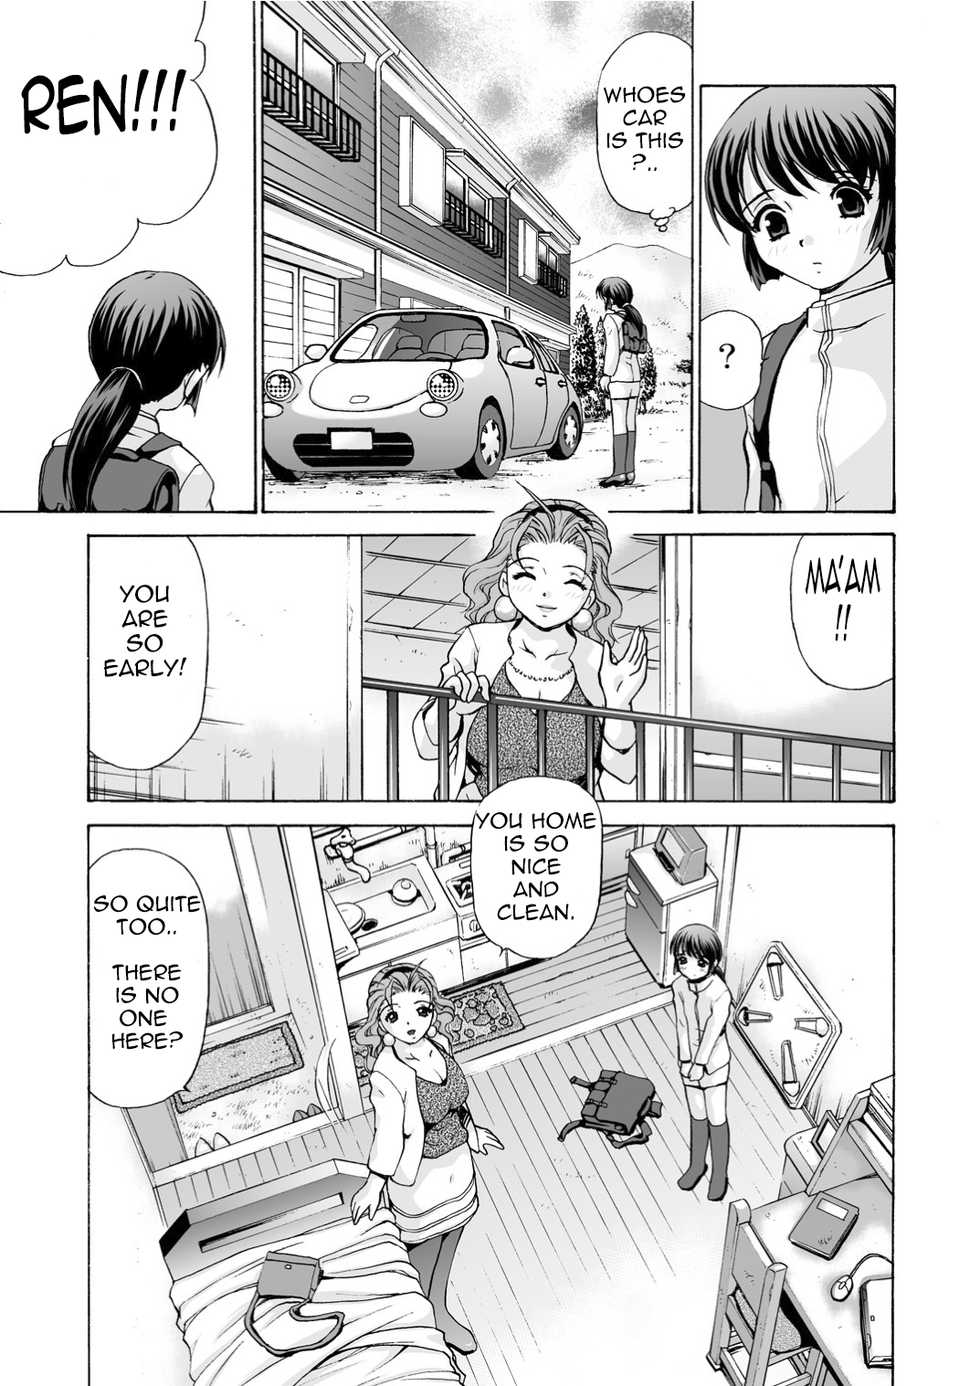 An Injection of Miss Mamiko [English] [Rewrite] [Drages] [Decensored] - Page 7